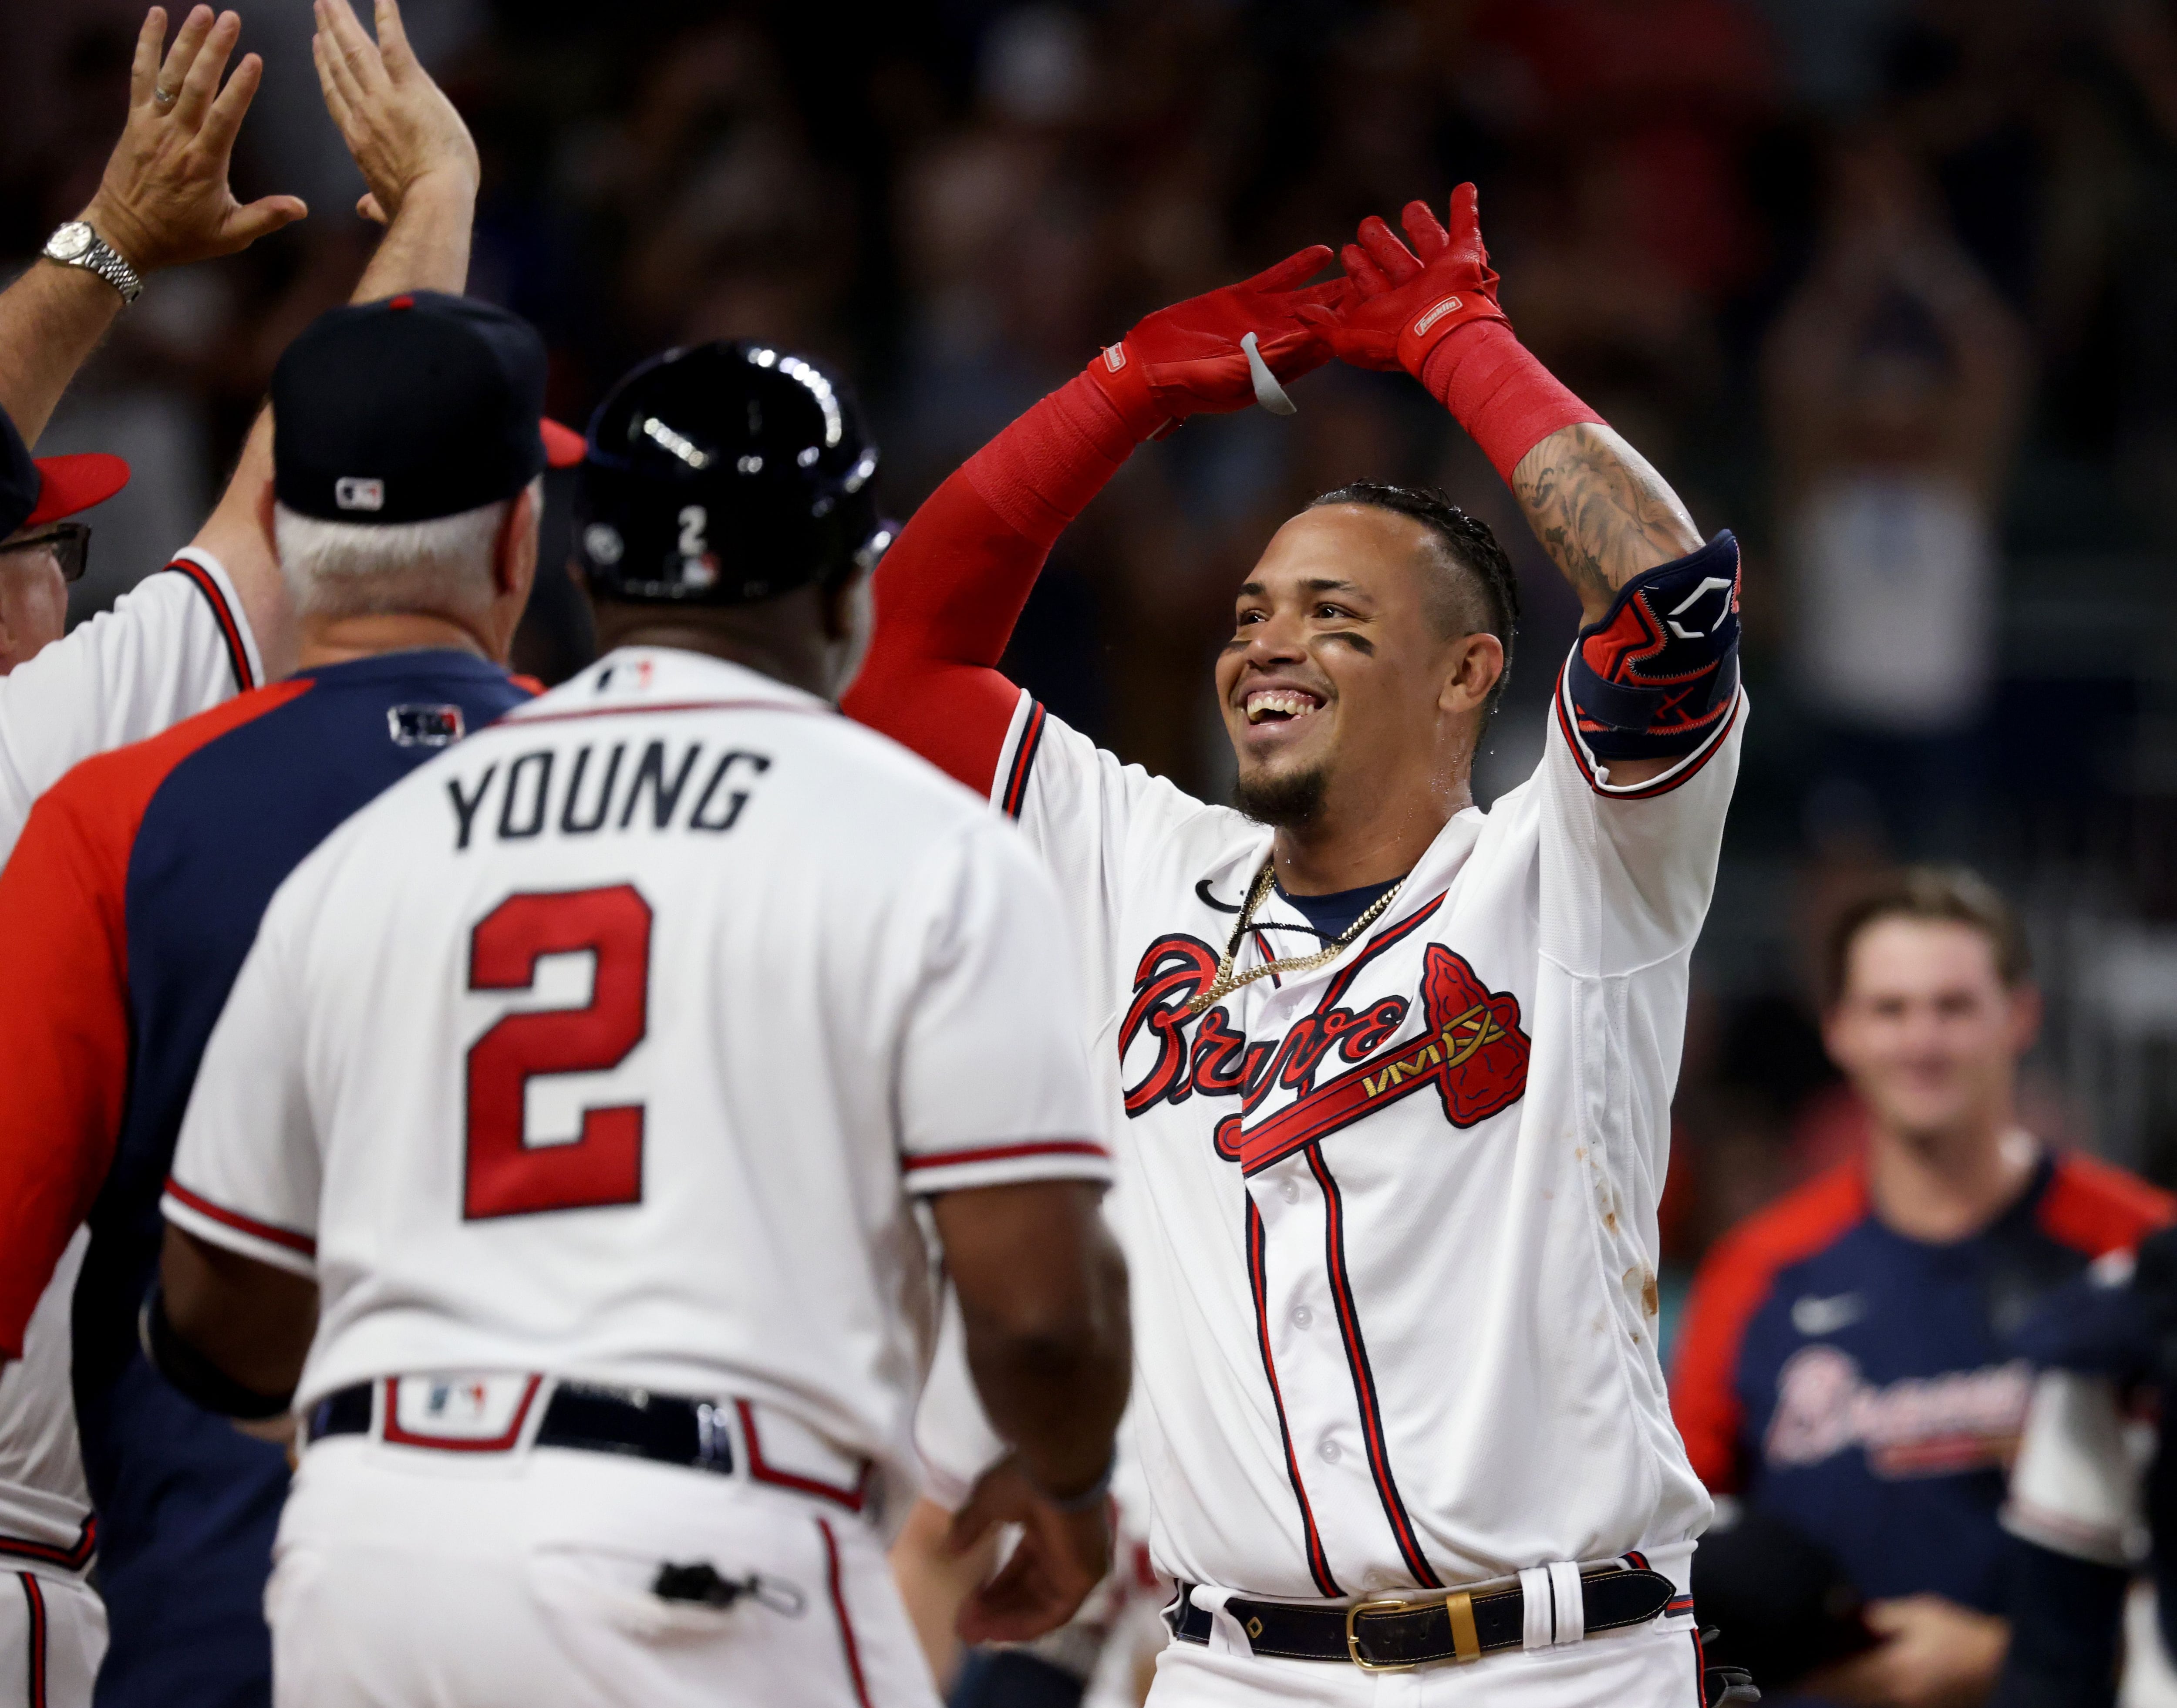 Orlando Arcia delivers as Braves walk-off Padres - Battery Power